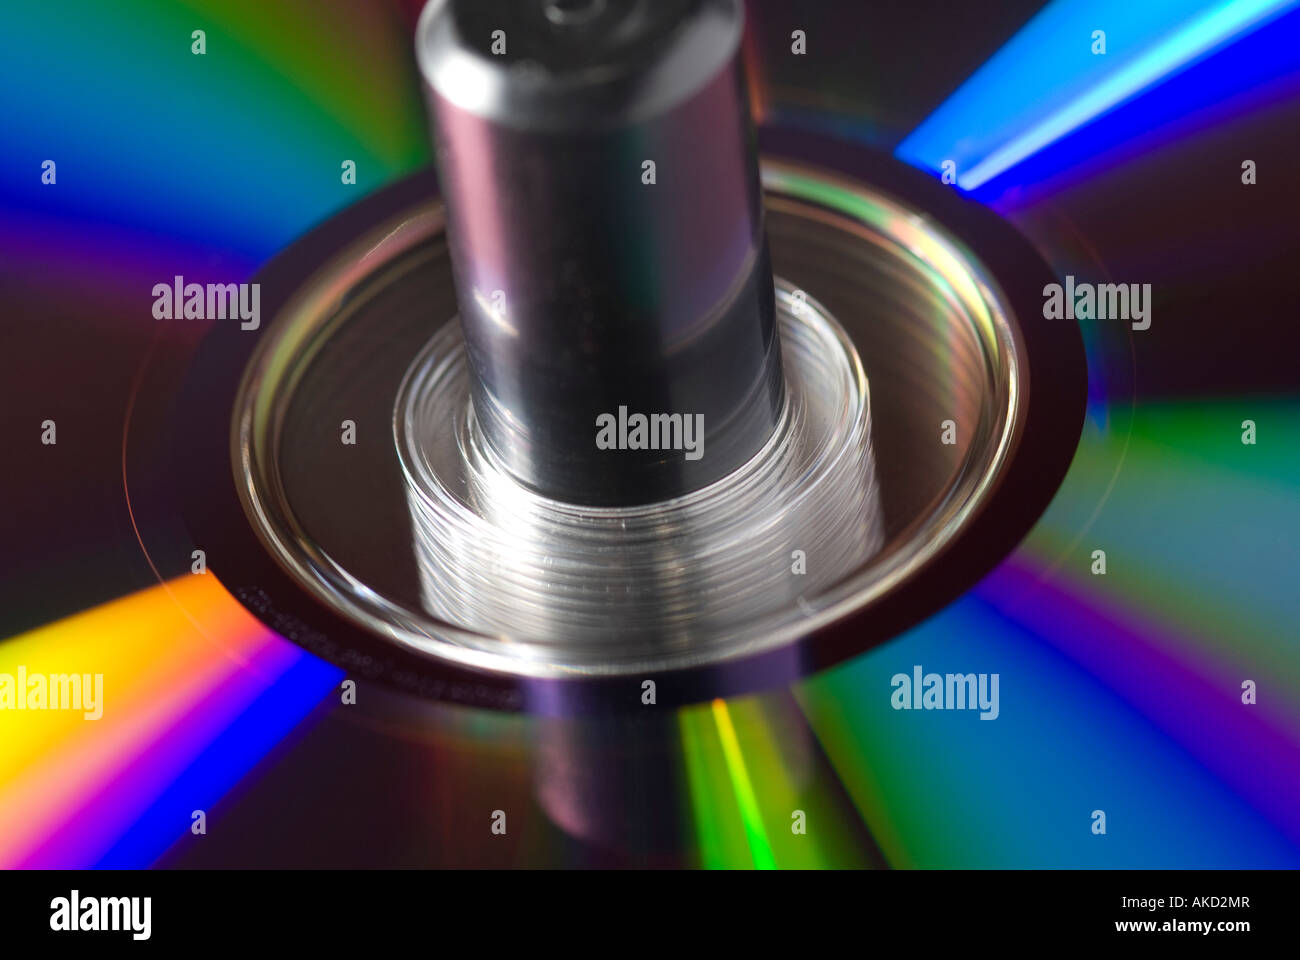 close up of dvd surface Stock Photo